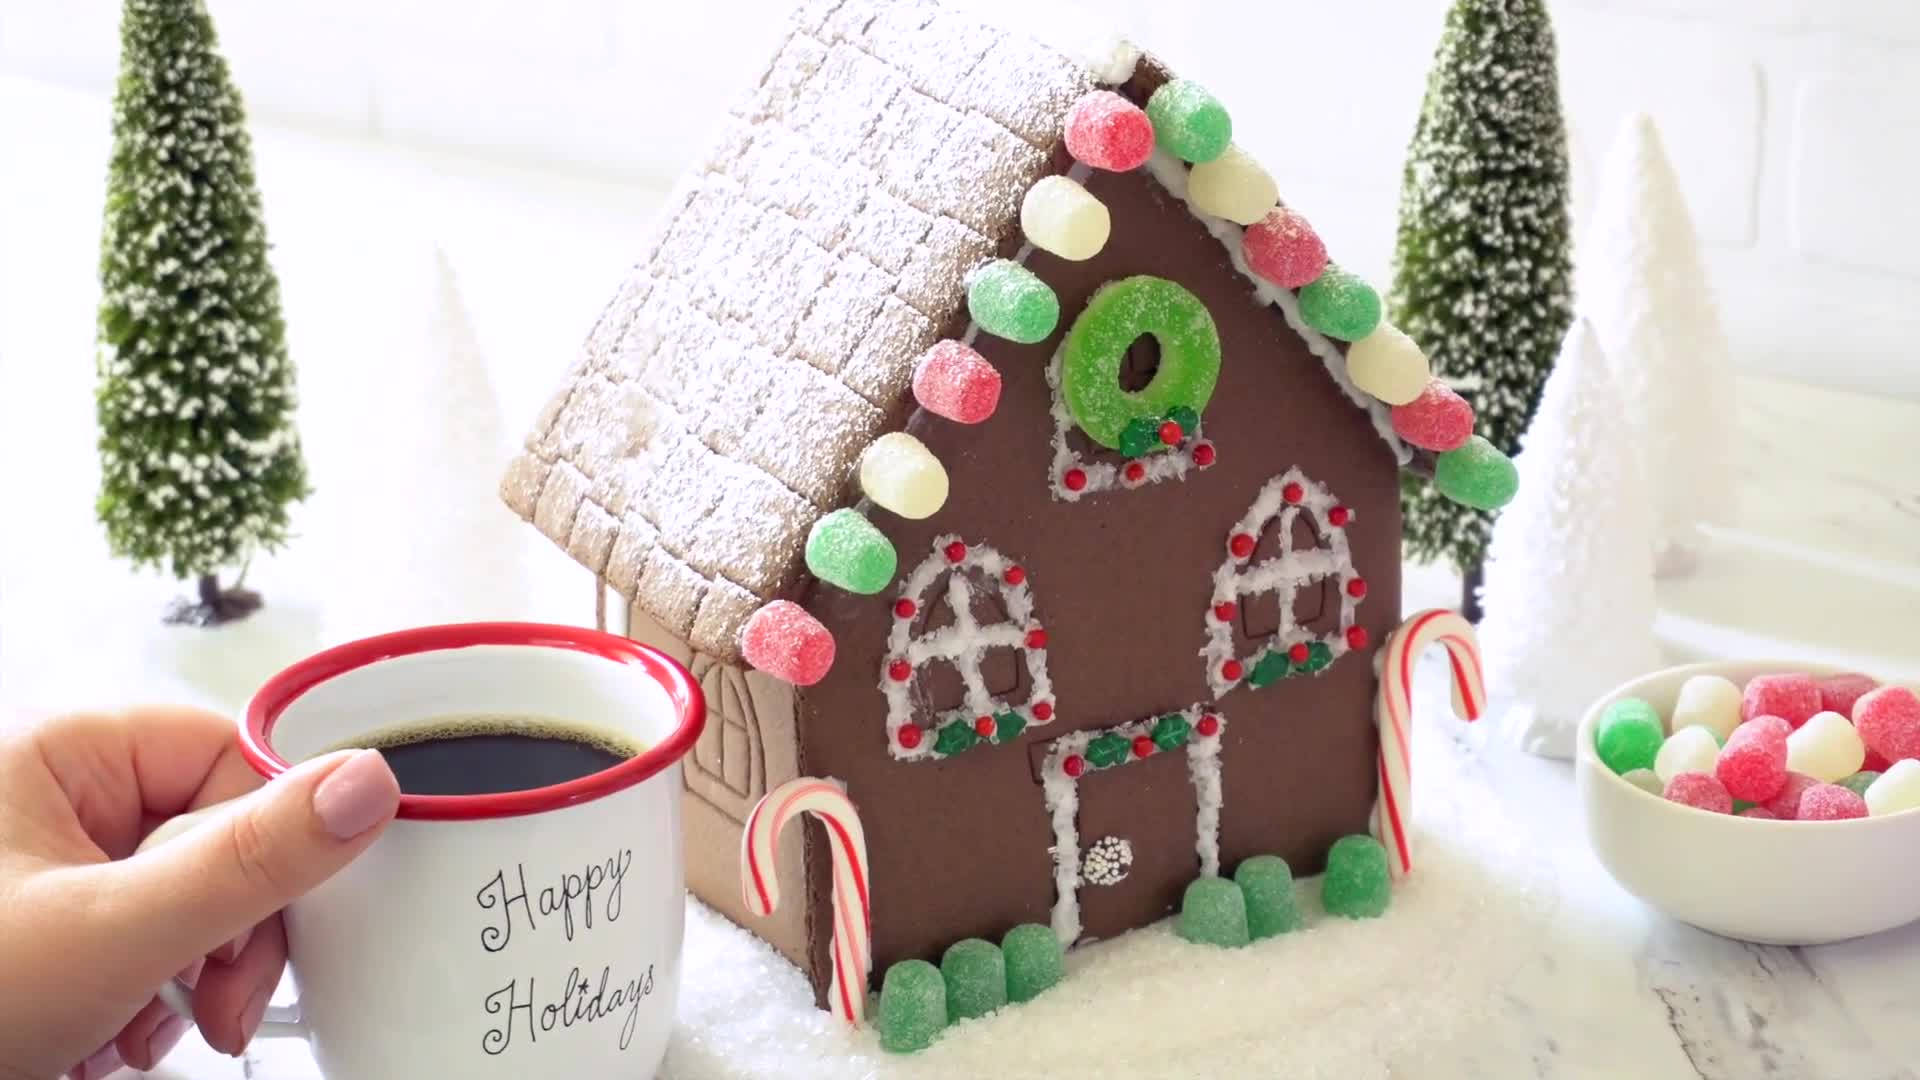 Top 999+ Gingerbread House Wallpapers Full HD, 4K Free to Use